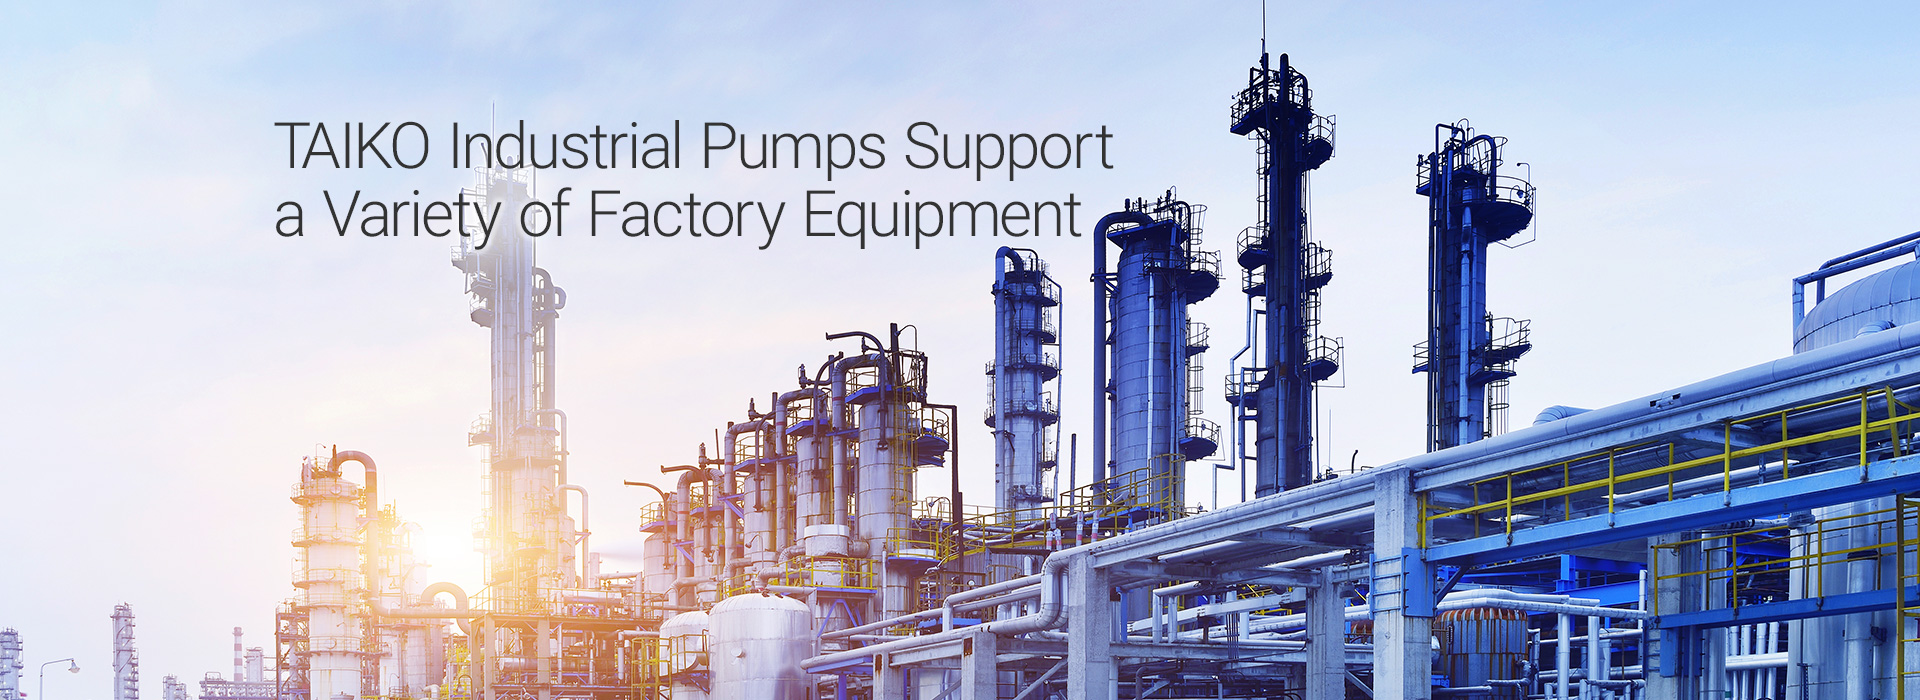 TAIKO Industrial Pumps Support a Variety of Factory Equipment